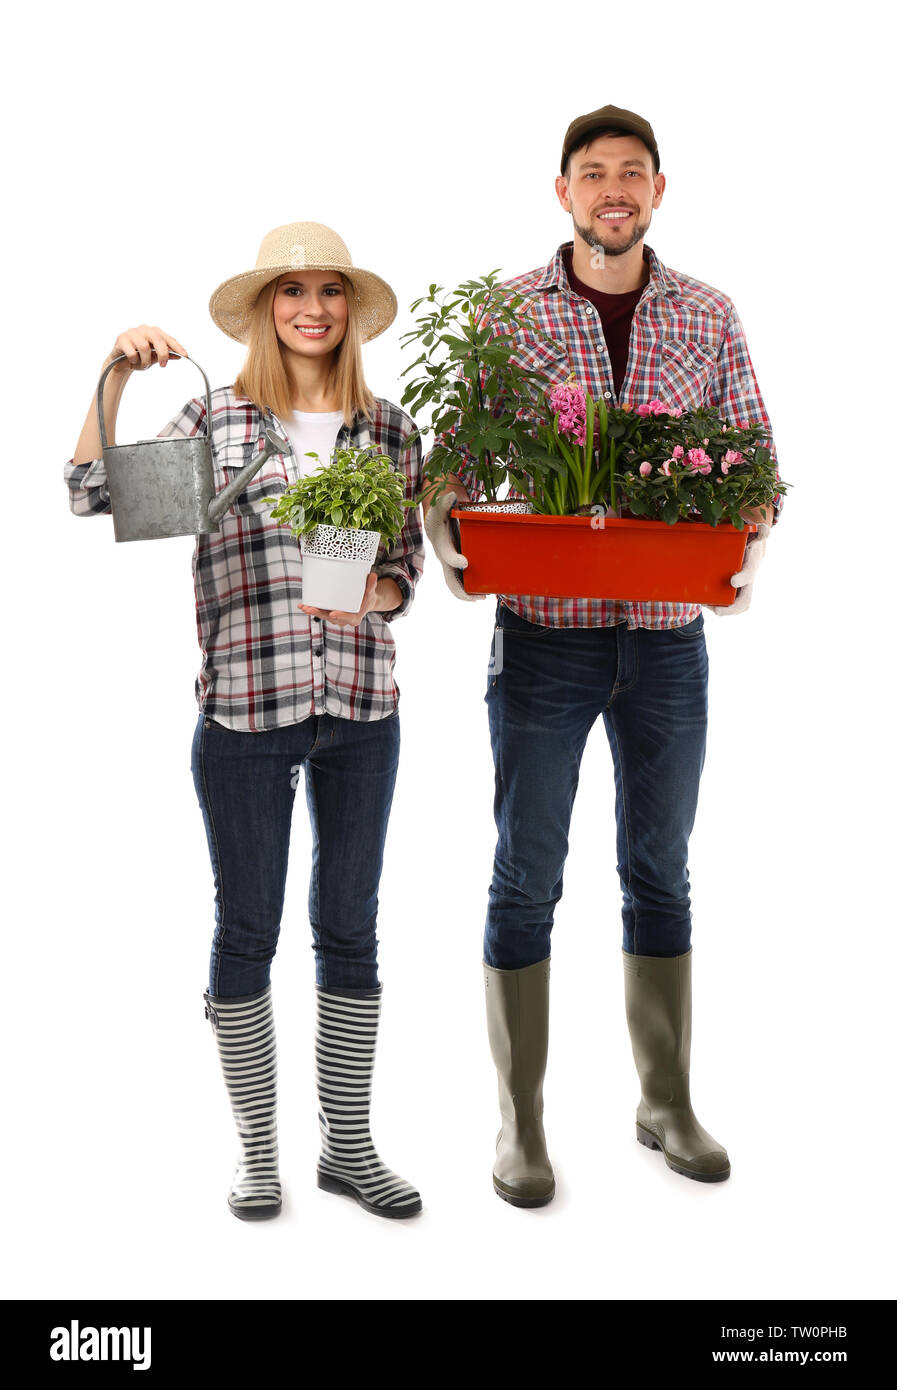 Two florists holding house plants isolated on white background Stock Photo